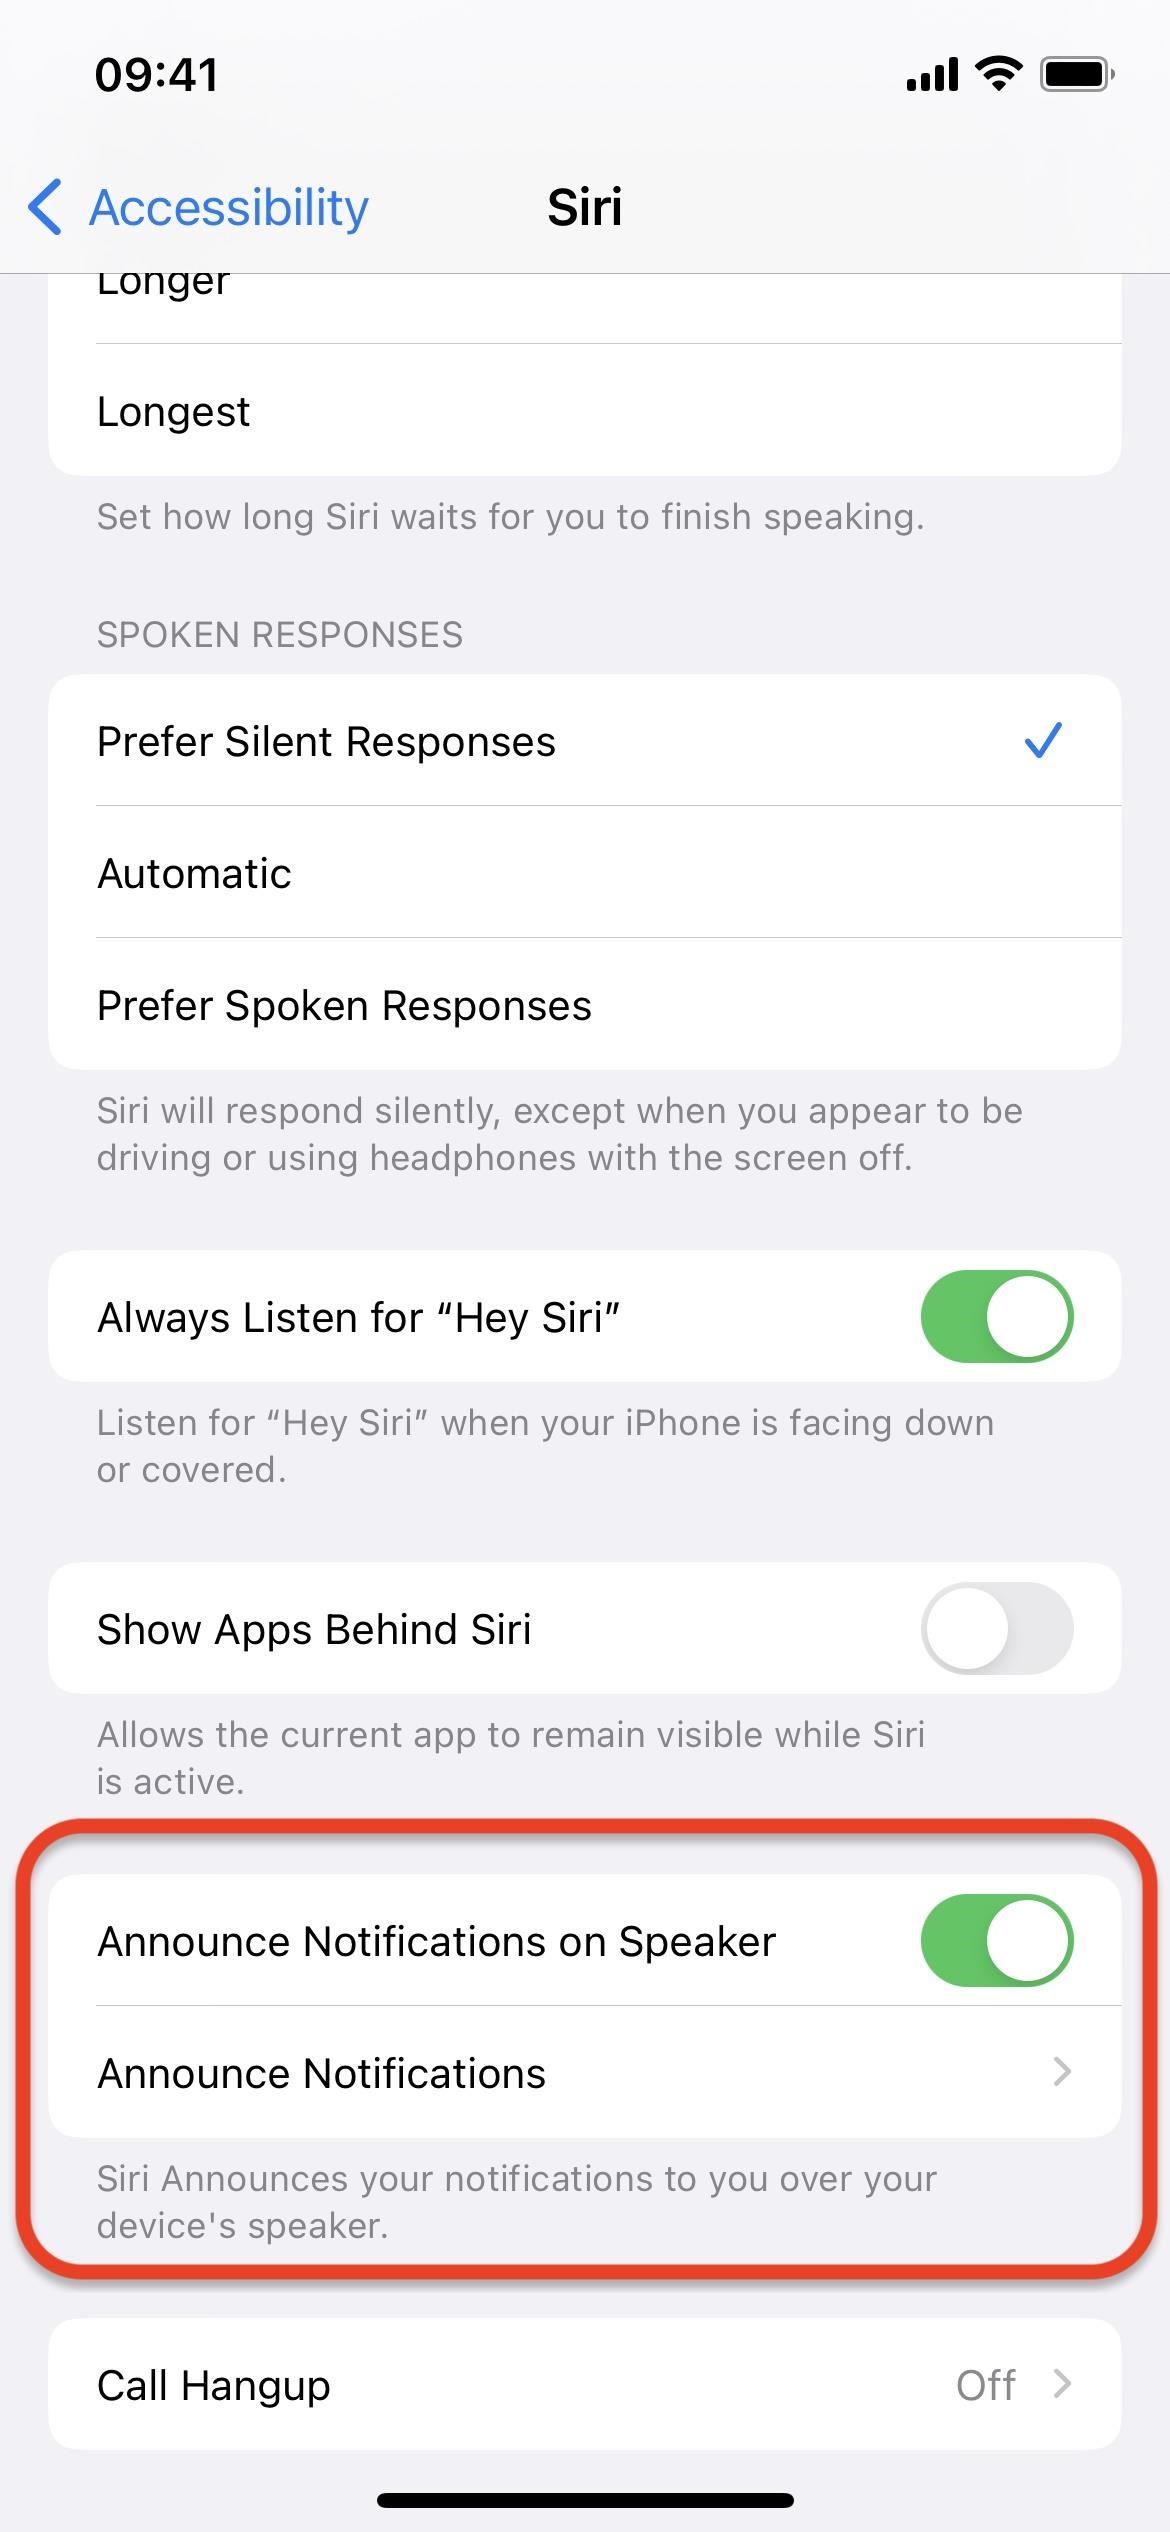 Your iPhone Has New Siri Skills You've Gotta Try Out — Here Are the 13 Best Ones